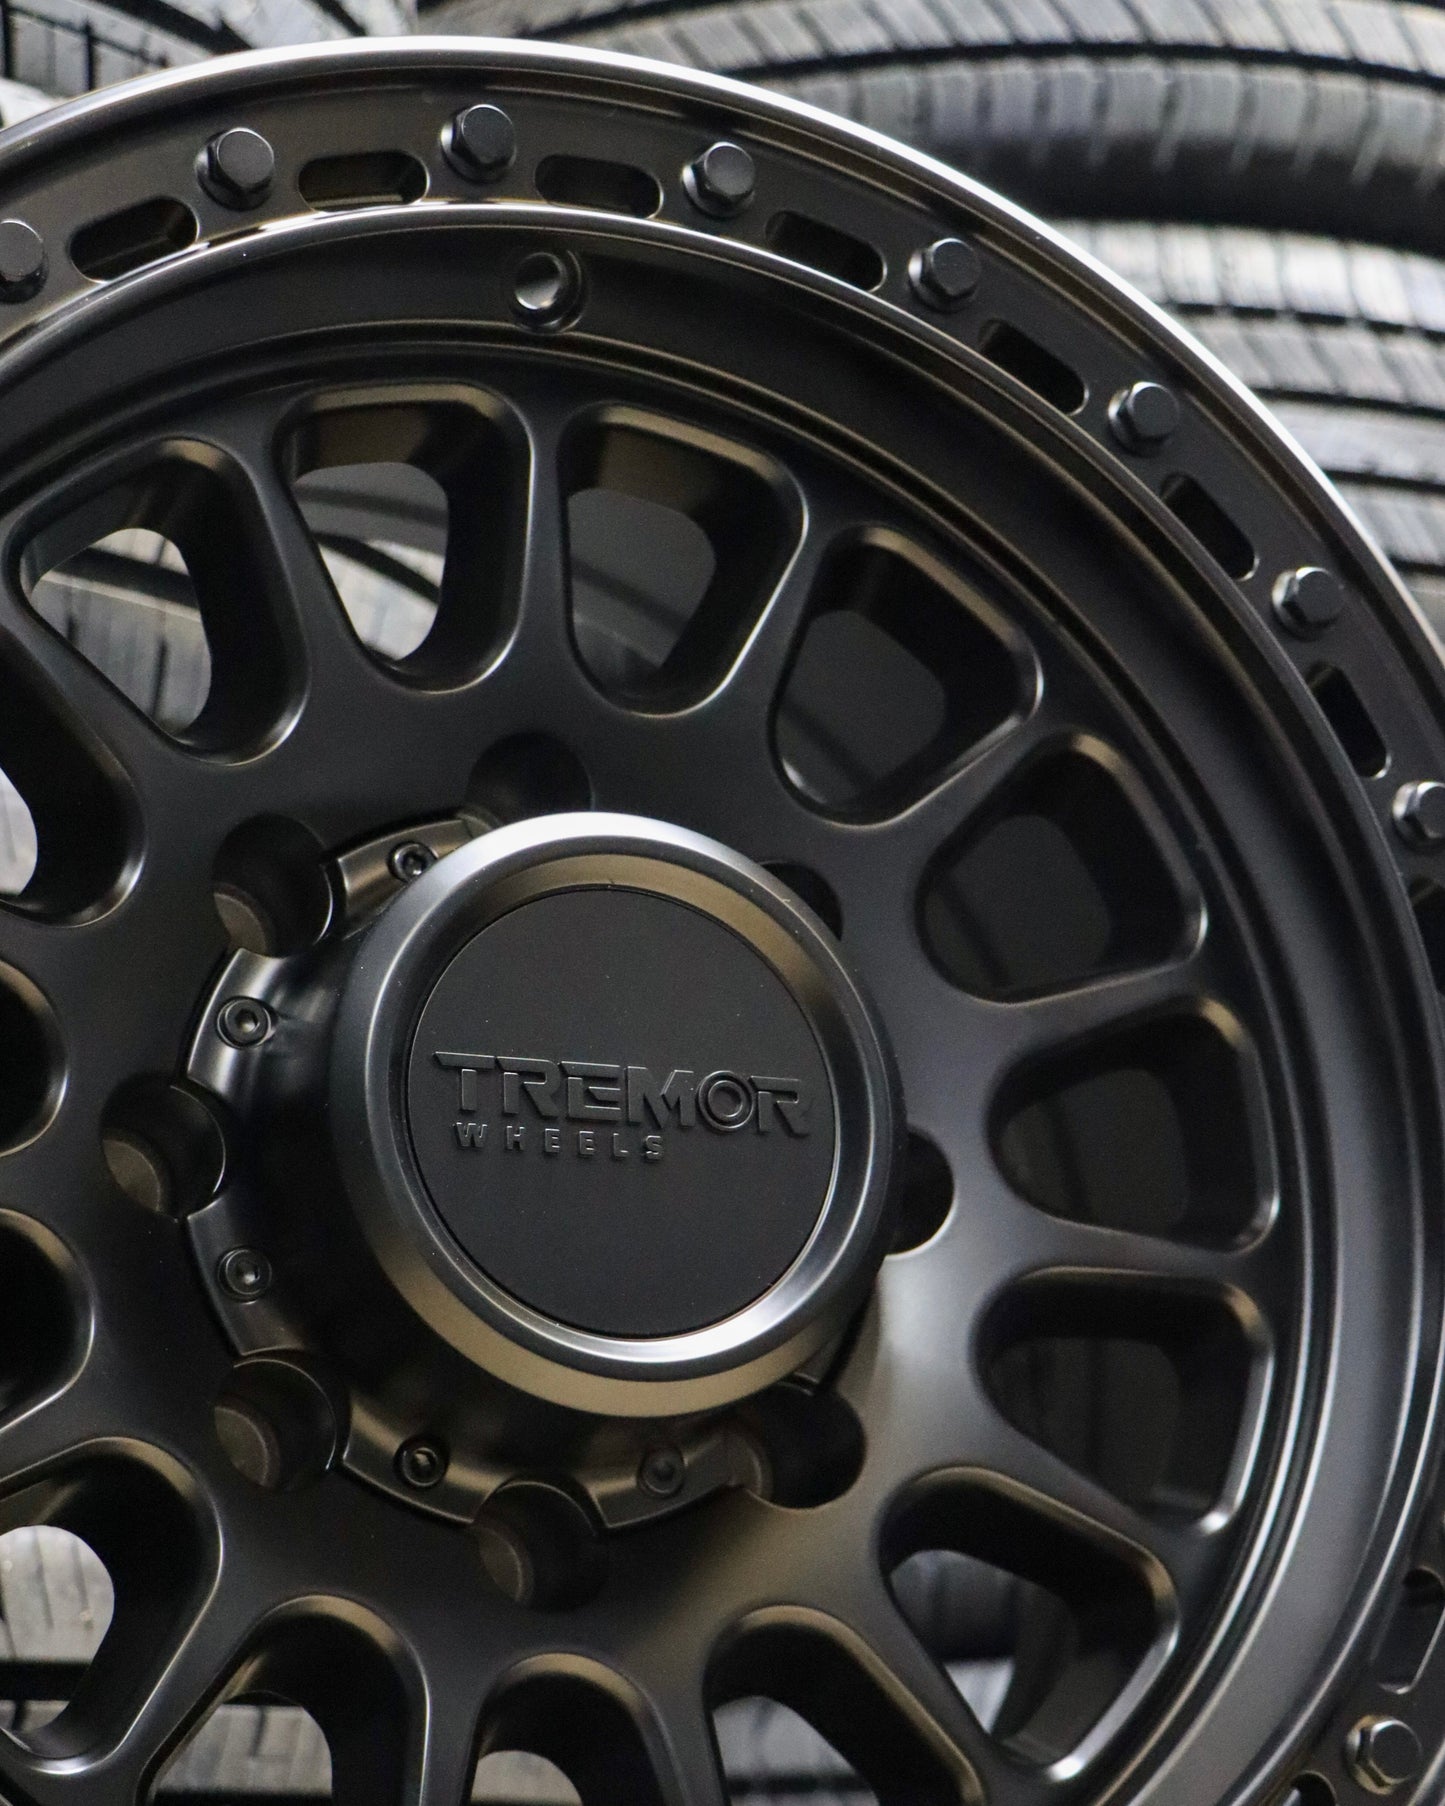 Close-up, of the tremor 104 aftershock in a satin black finish.